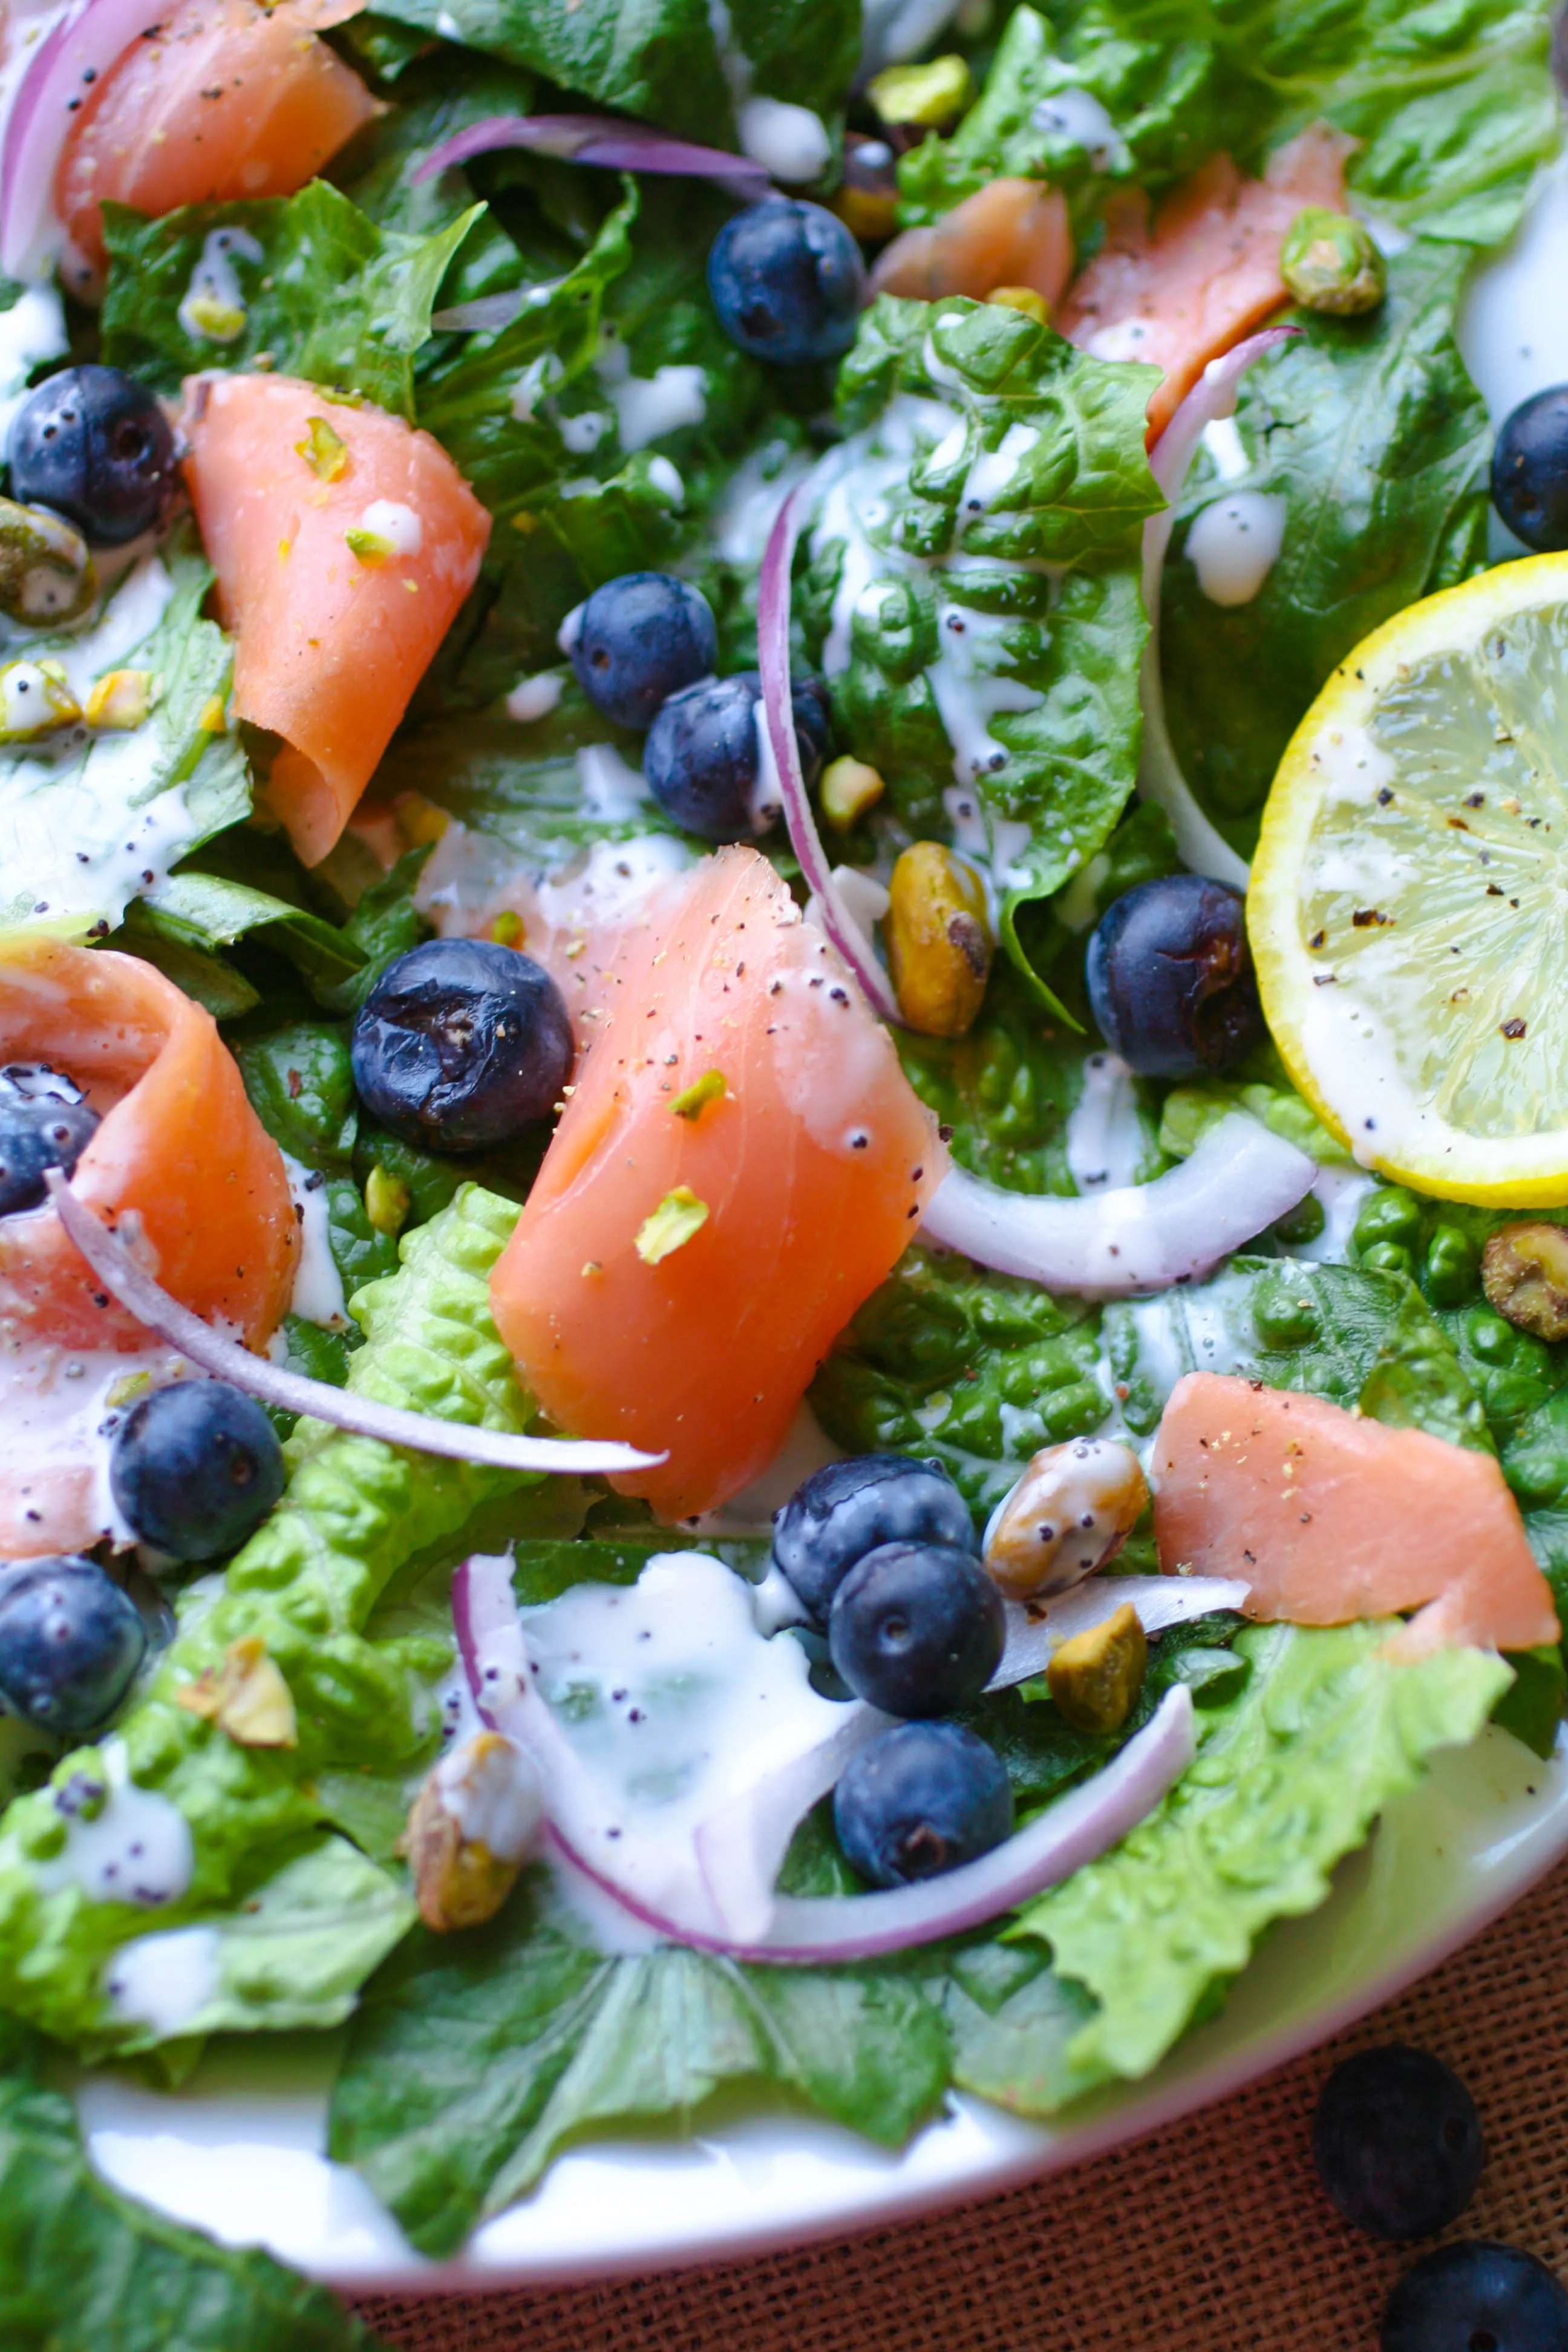 Smoked Salmon Salad with Blueberries and Lemon Poppy Seed Dressing is a filling meal. No oven required for this summer dish.